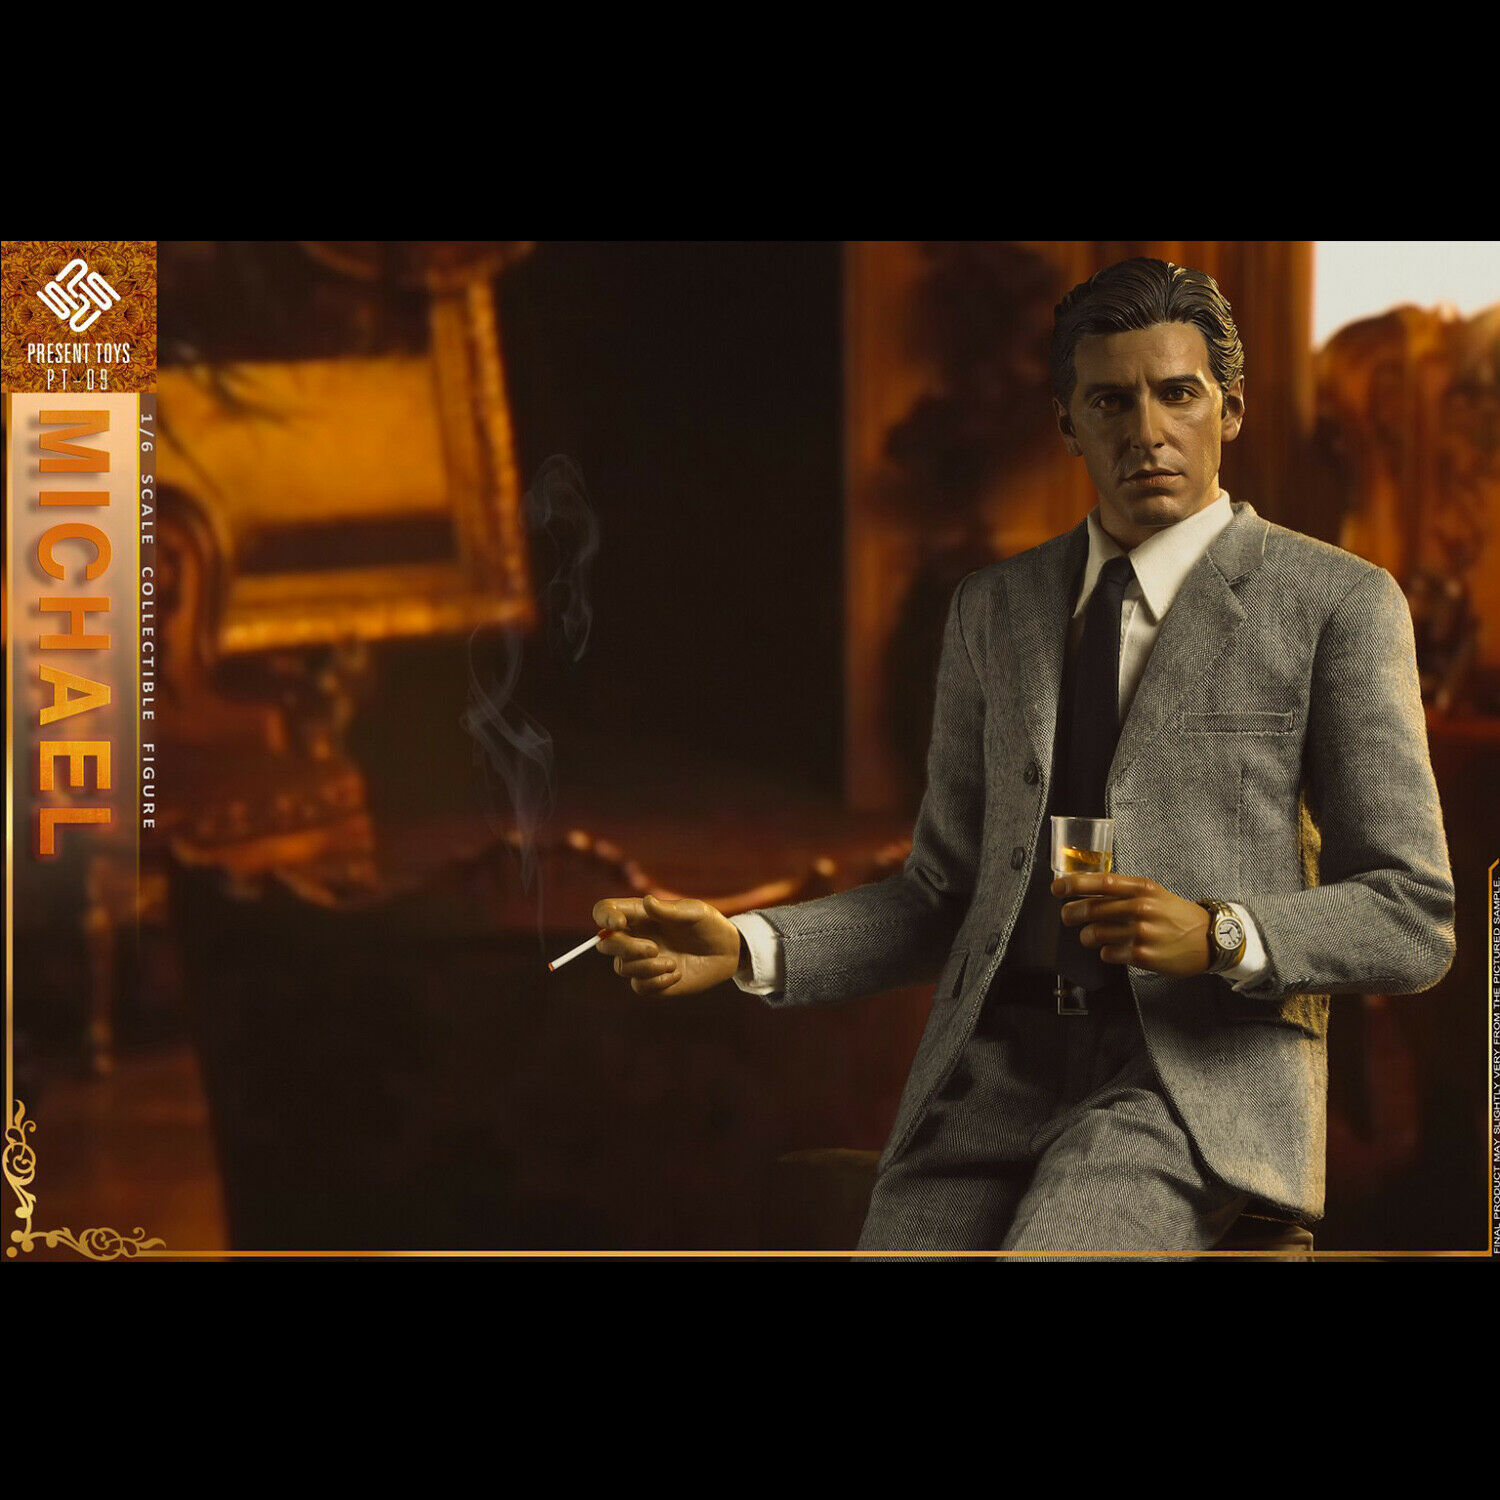 Details about   PRESENT TOYS 1:6 The second Mob Boss Michael Corleone Al Pacino Action Figure 